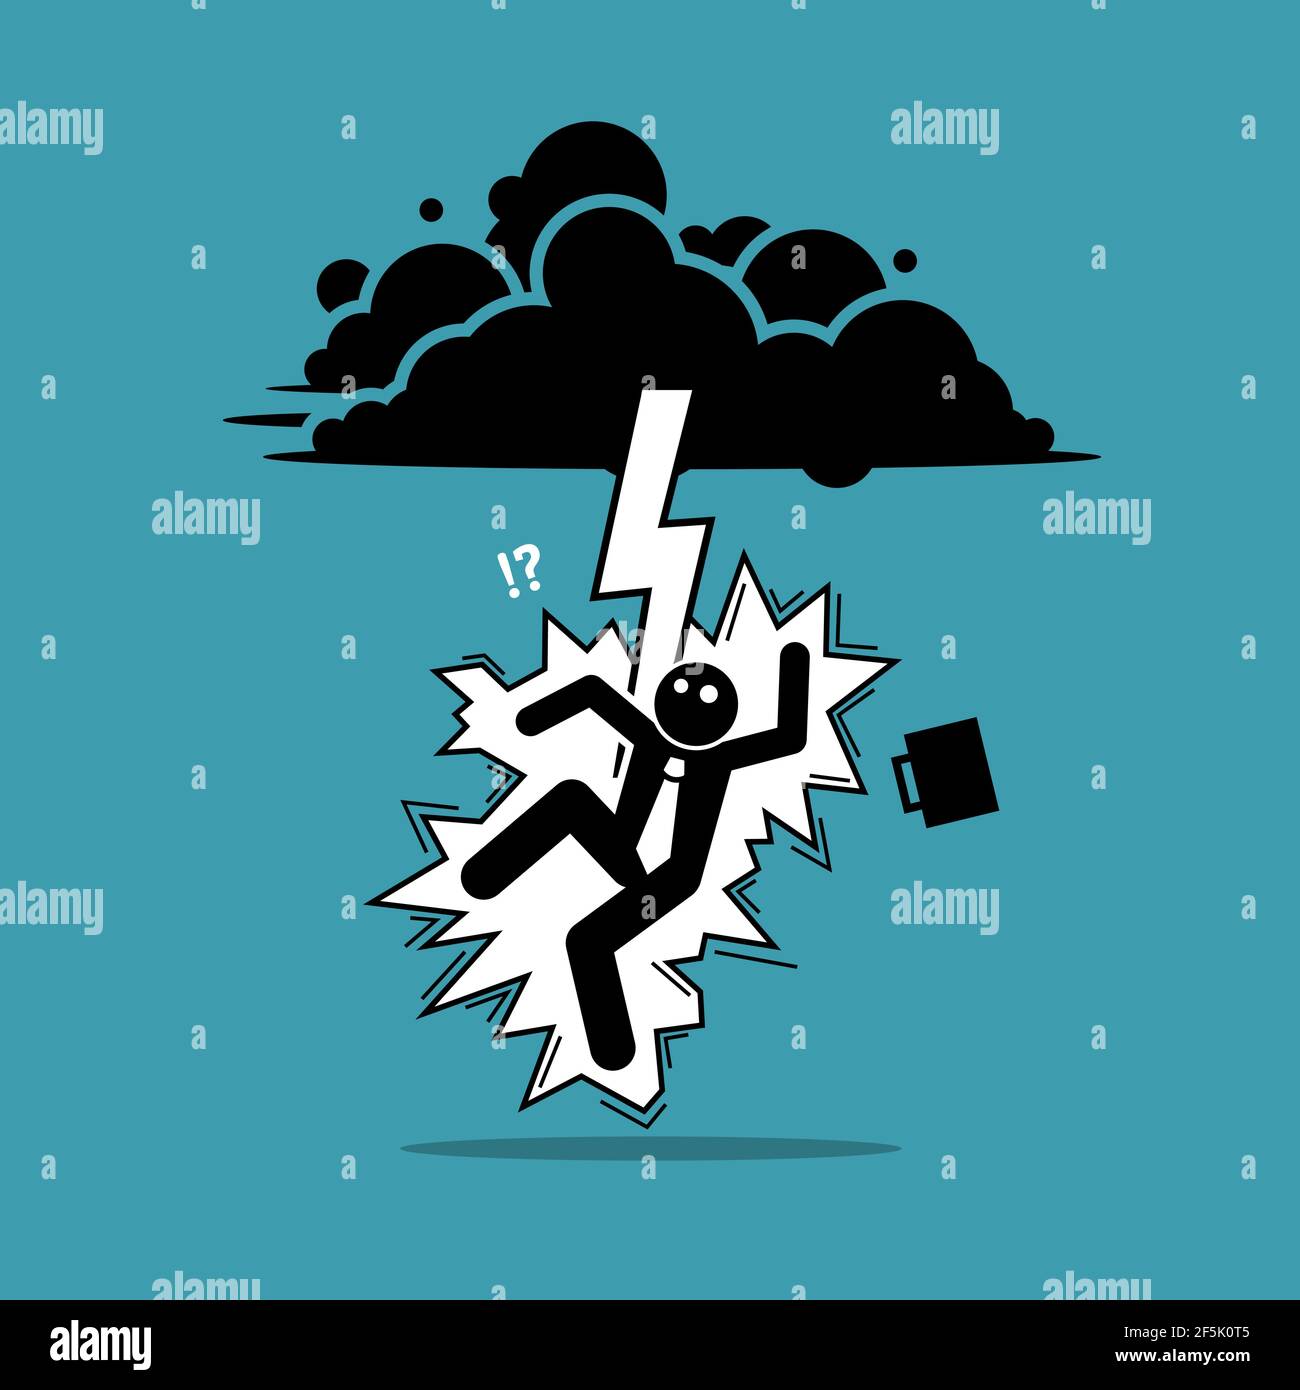 Businessman struck by lightning or thunder from the dark cloud. Vector illustration concept of bad luck, misery, unfortunate, unlucky, disaster, risk, Stock Vector